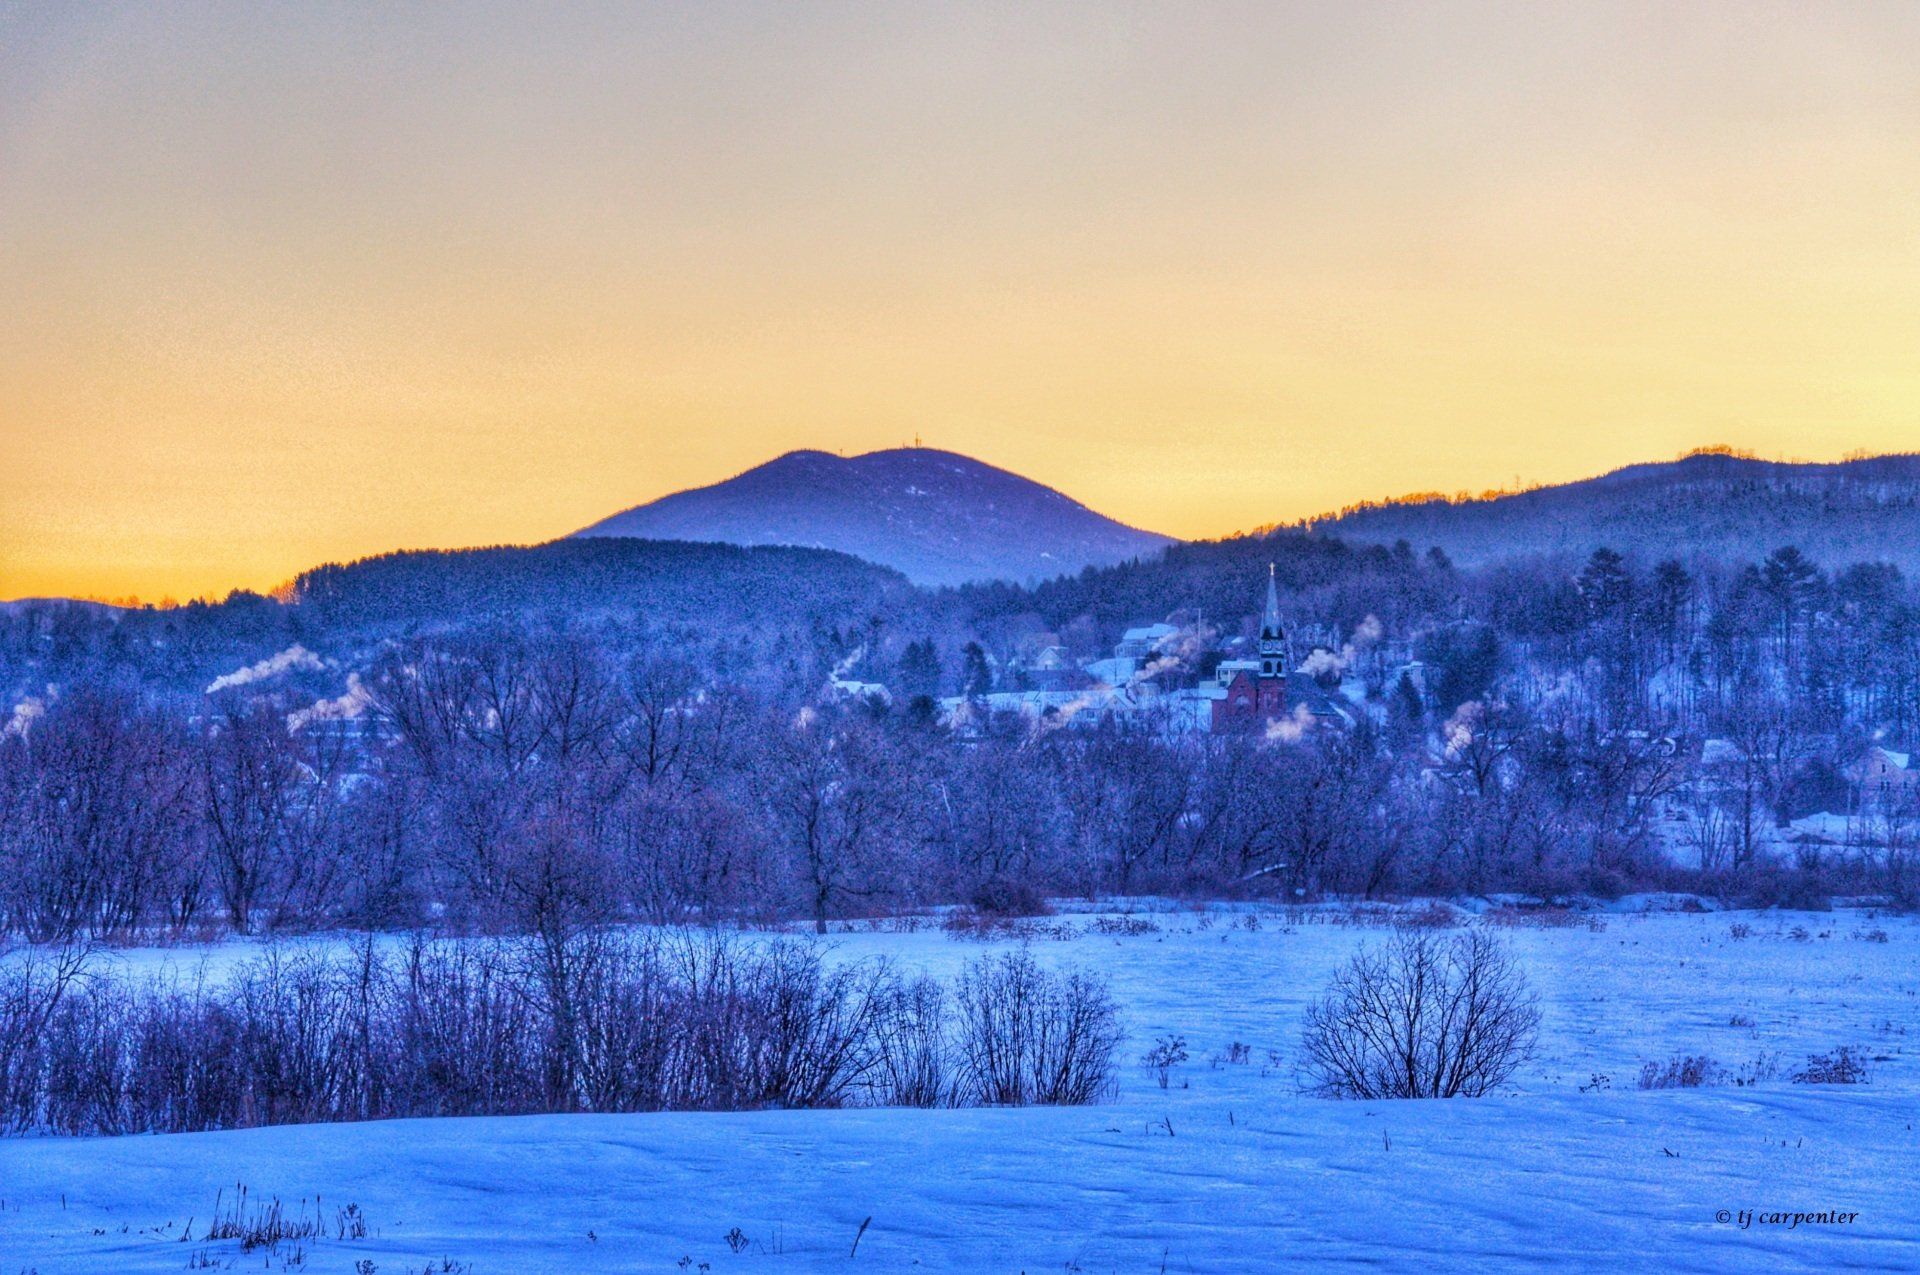 Burke Mountain in the winter in the NEK of Vermont